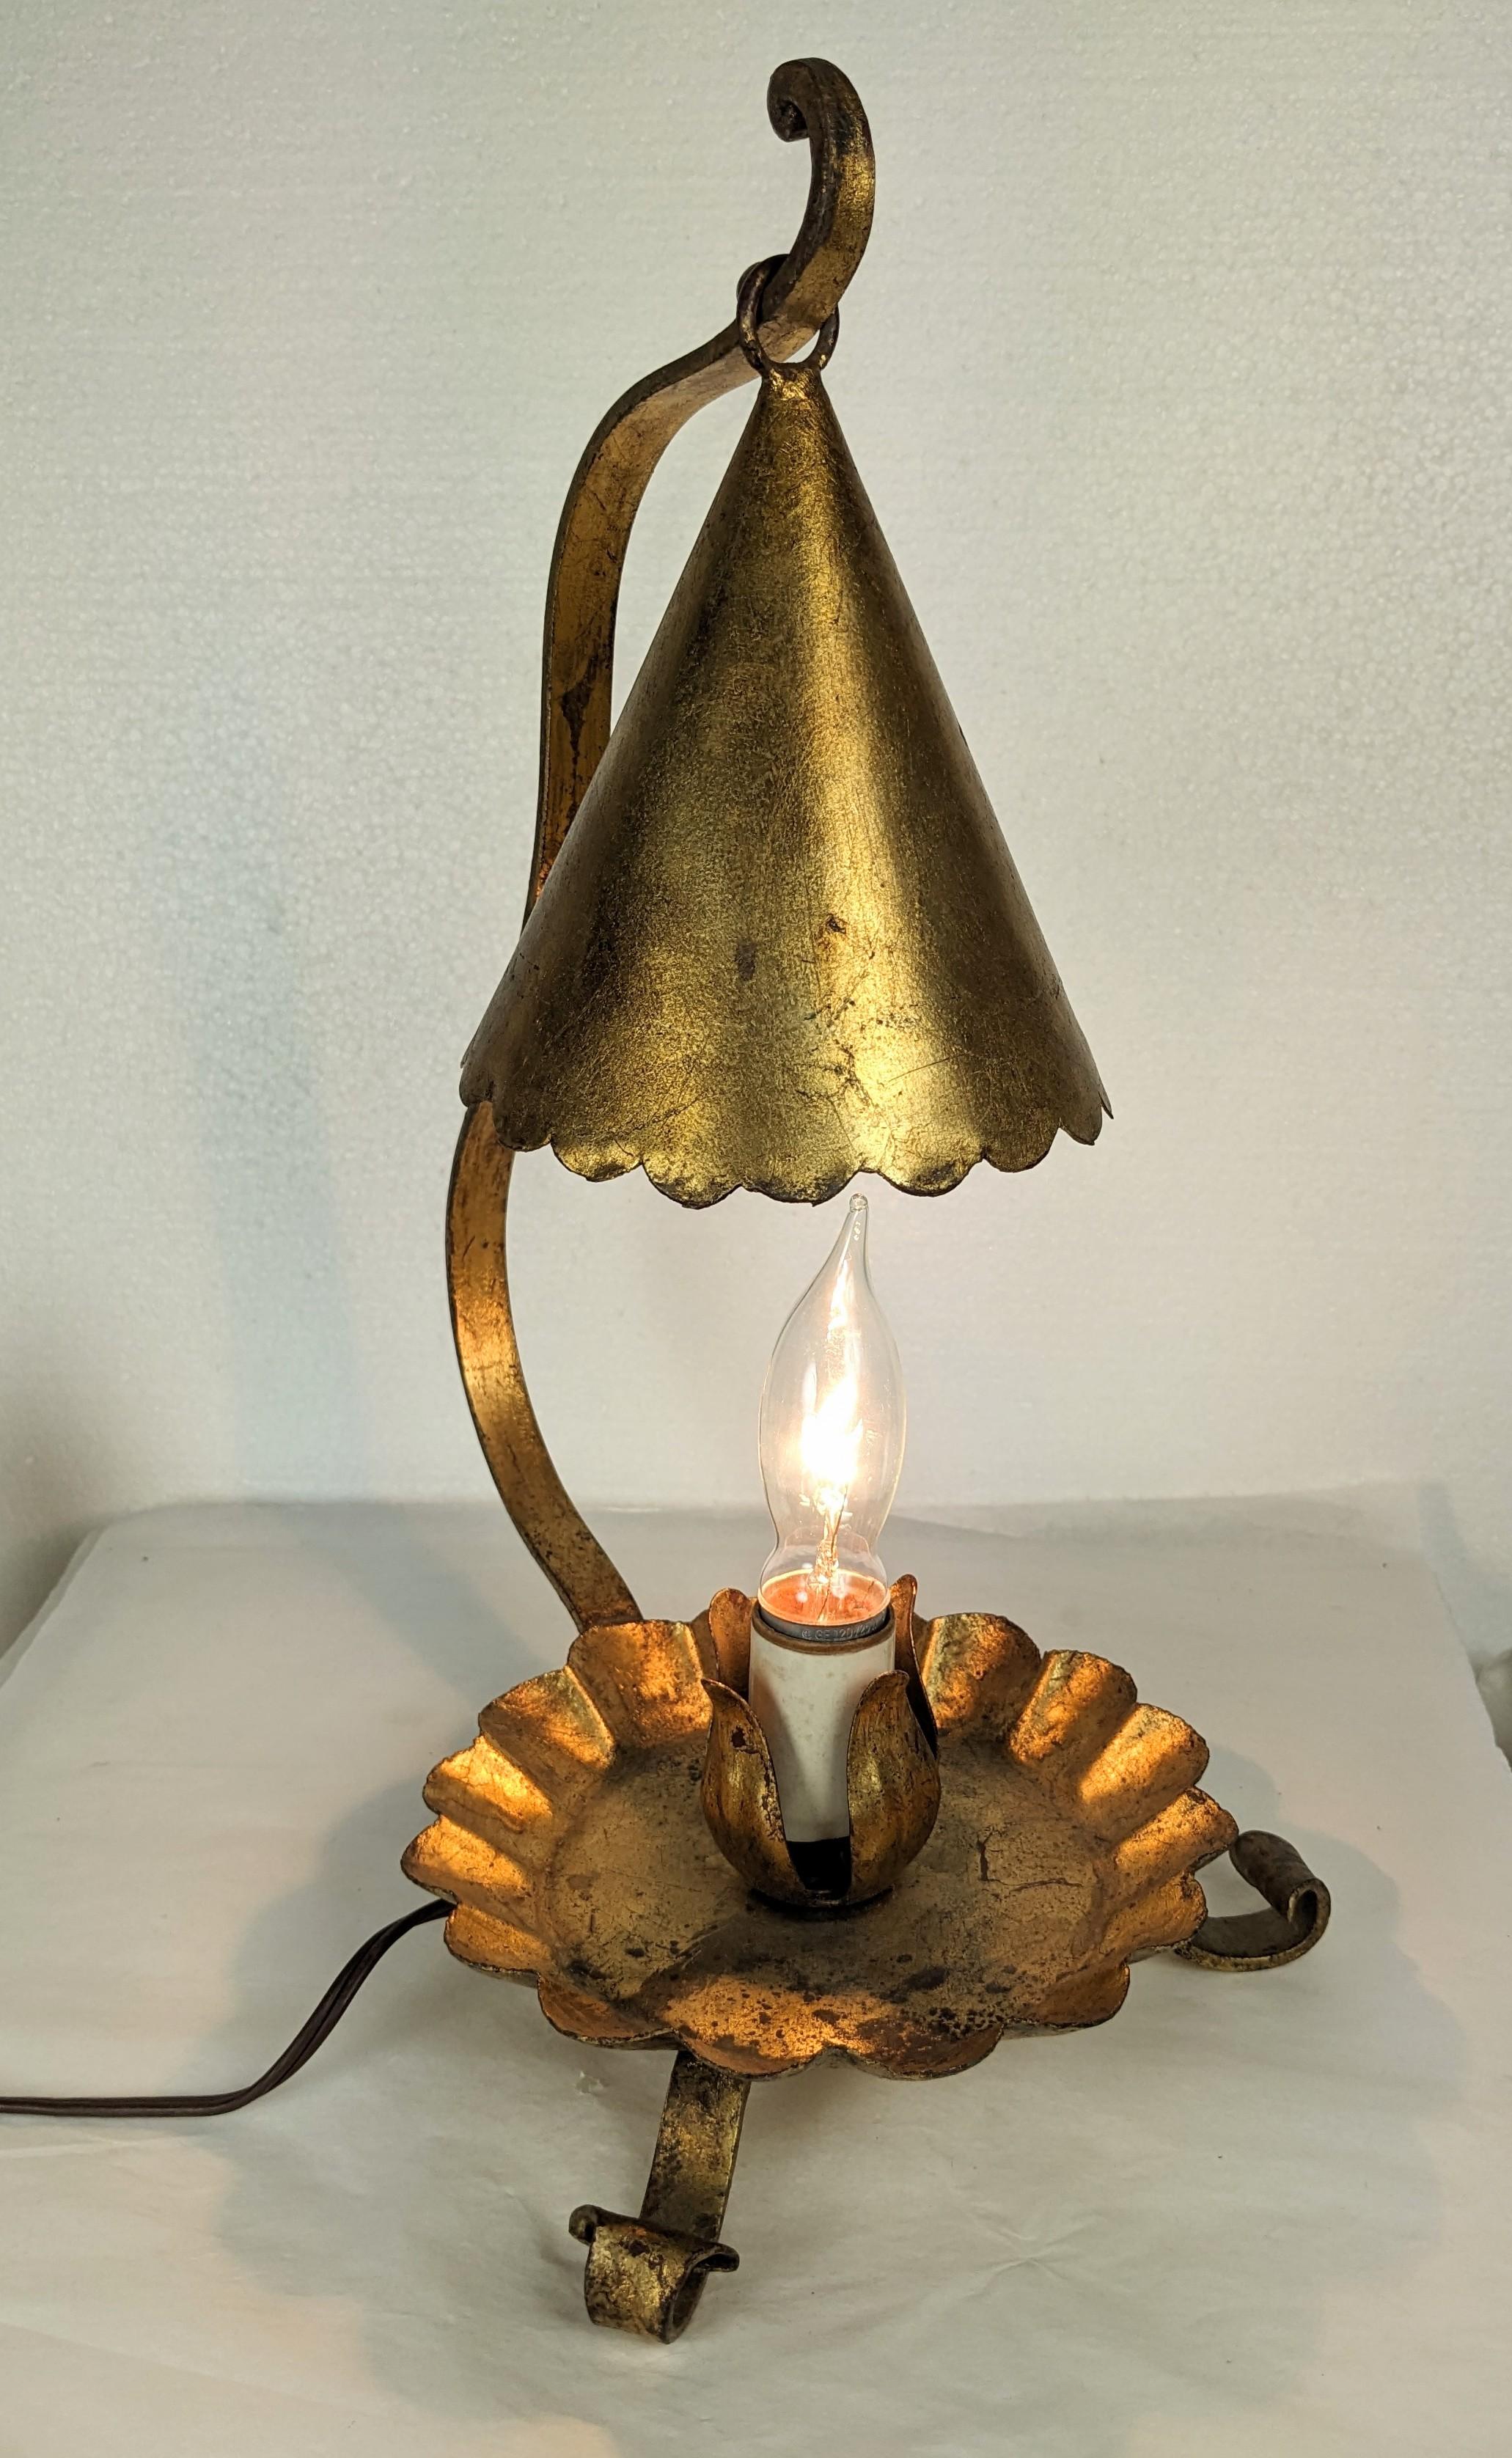 Charming Gilt Florentine Candle Snuffer Lamp from the 1960's. Designed as an electrified candle snuffer in gold leafed brass. Shade comes off cleaning with switch/plug in. 1960's Italy. 
